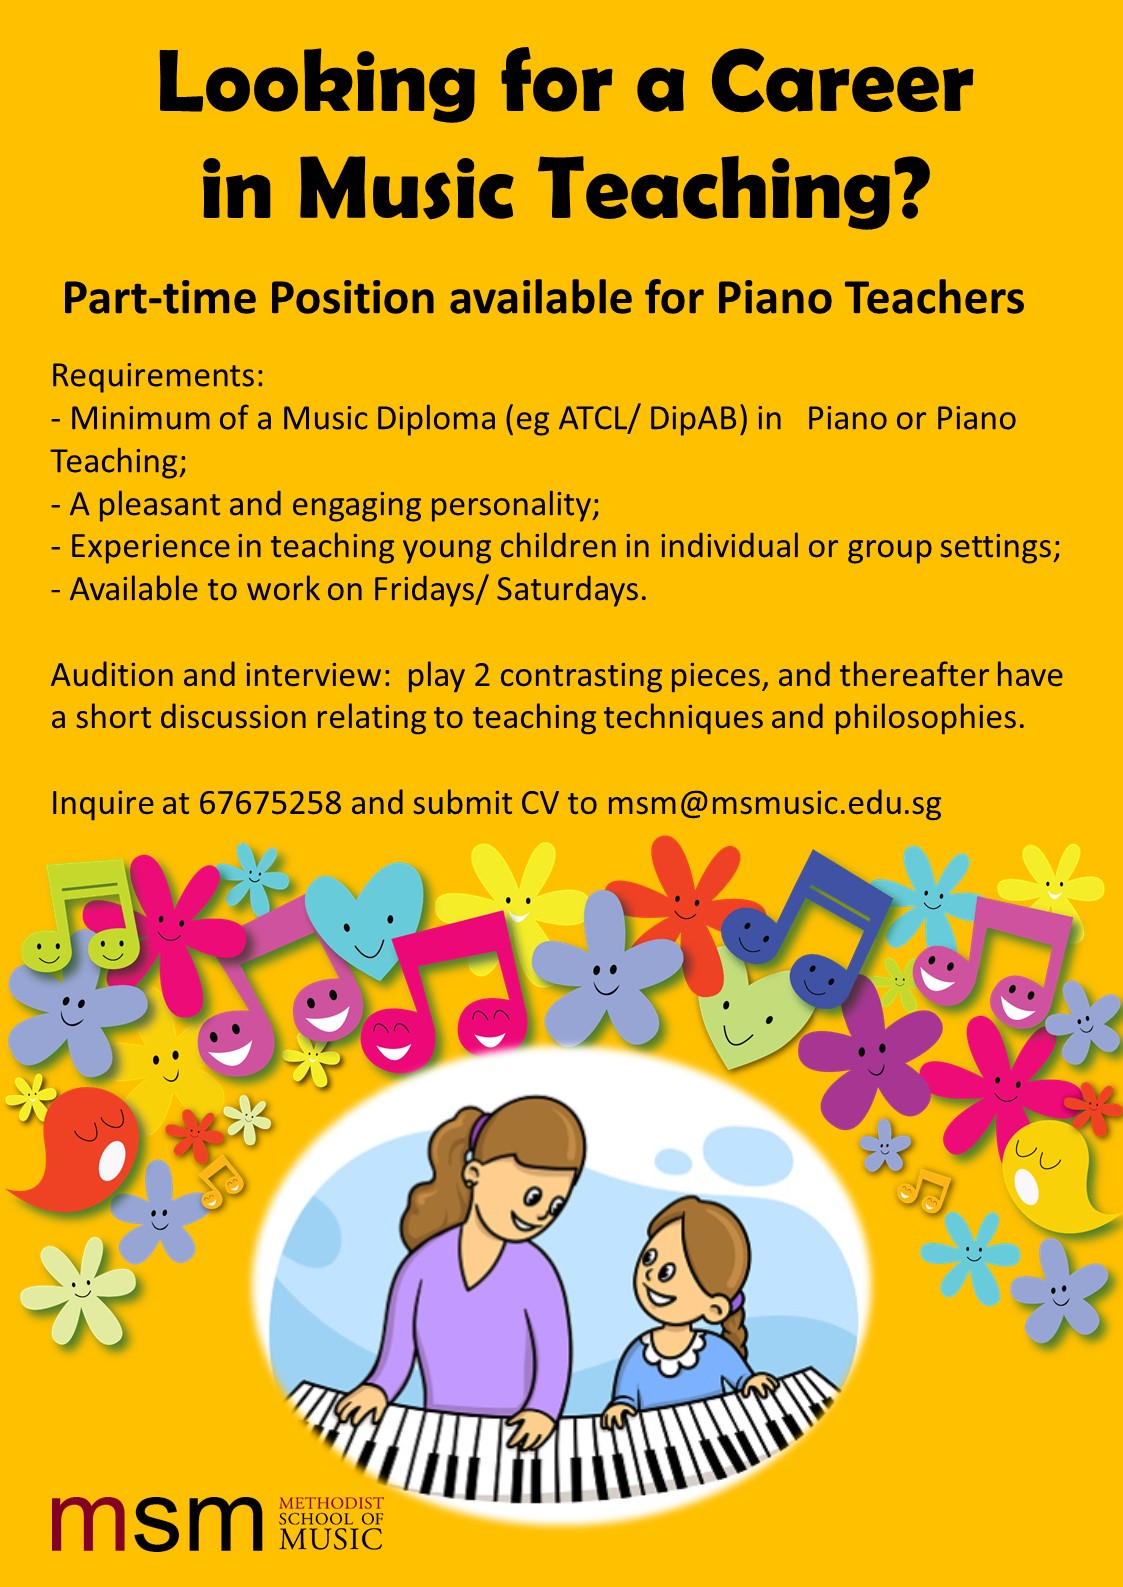 Looking for a Career in Music Teaching?